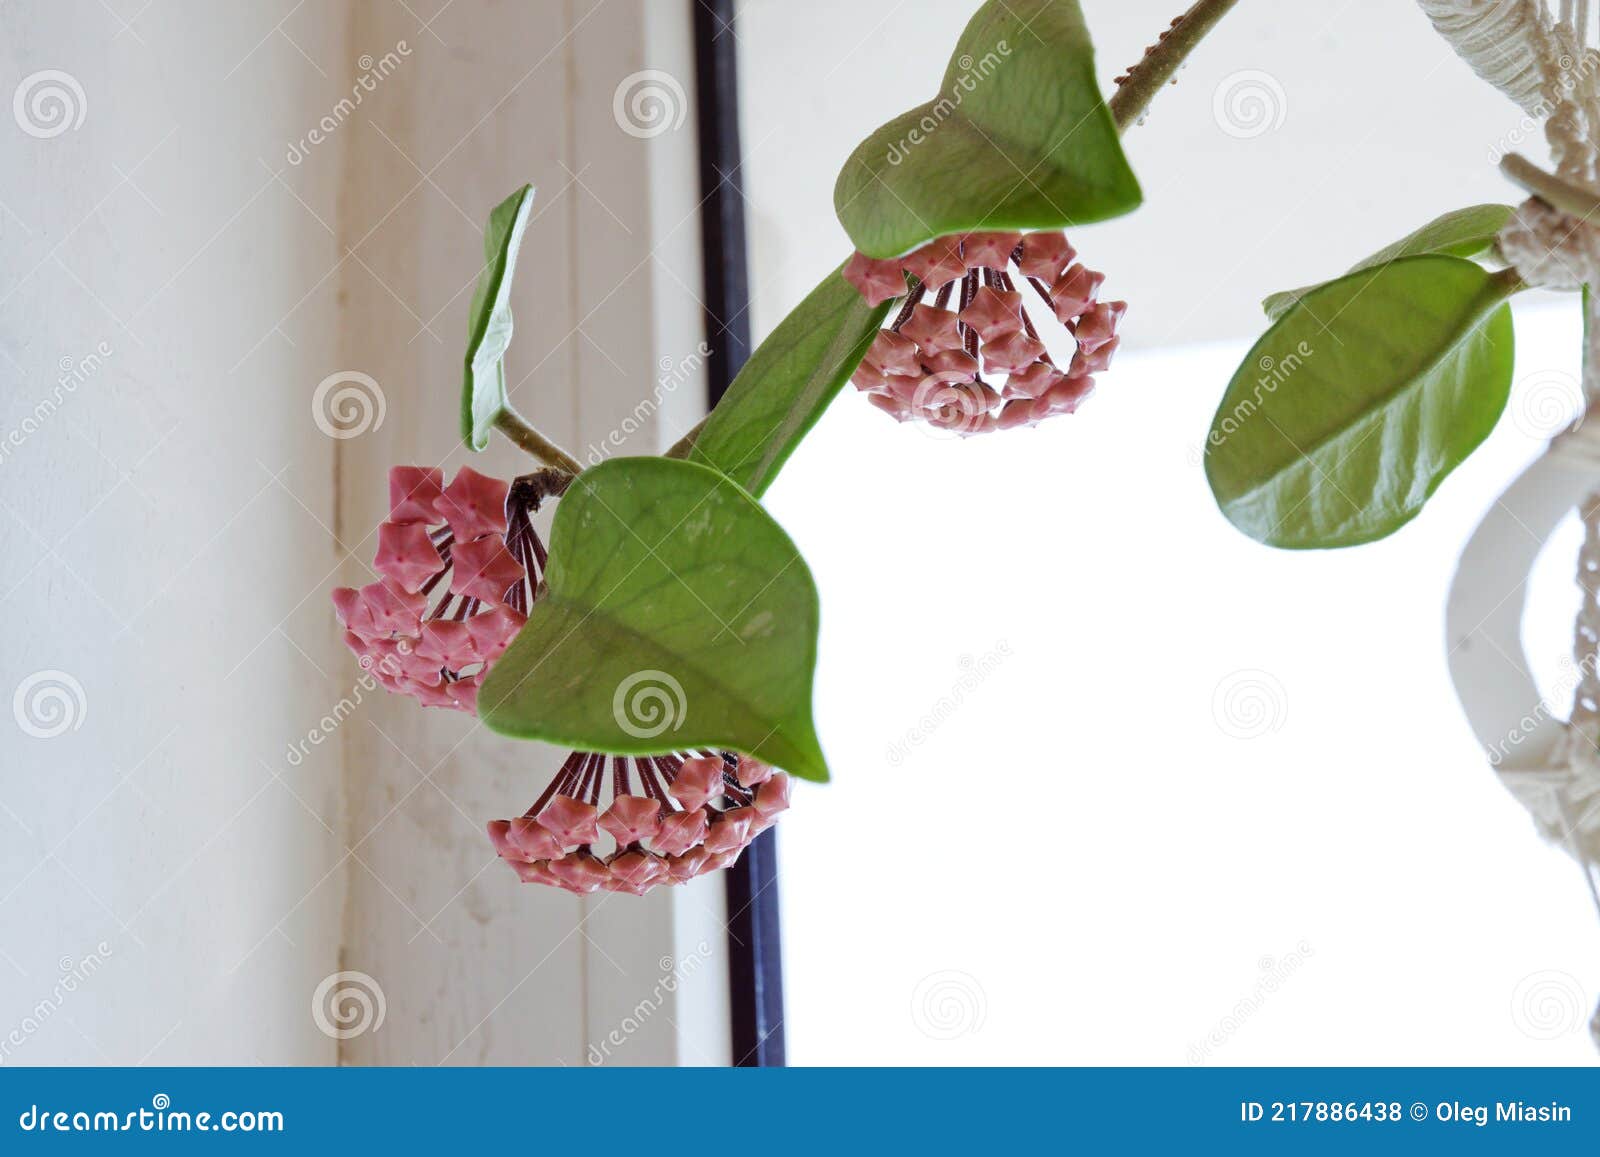 Wax Plant Buds Clusters Closeup Rare Homeflower With Waxy Leaves And